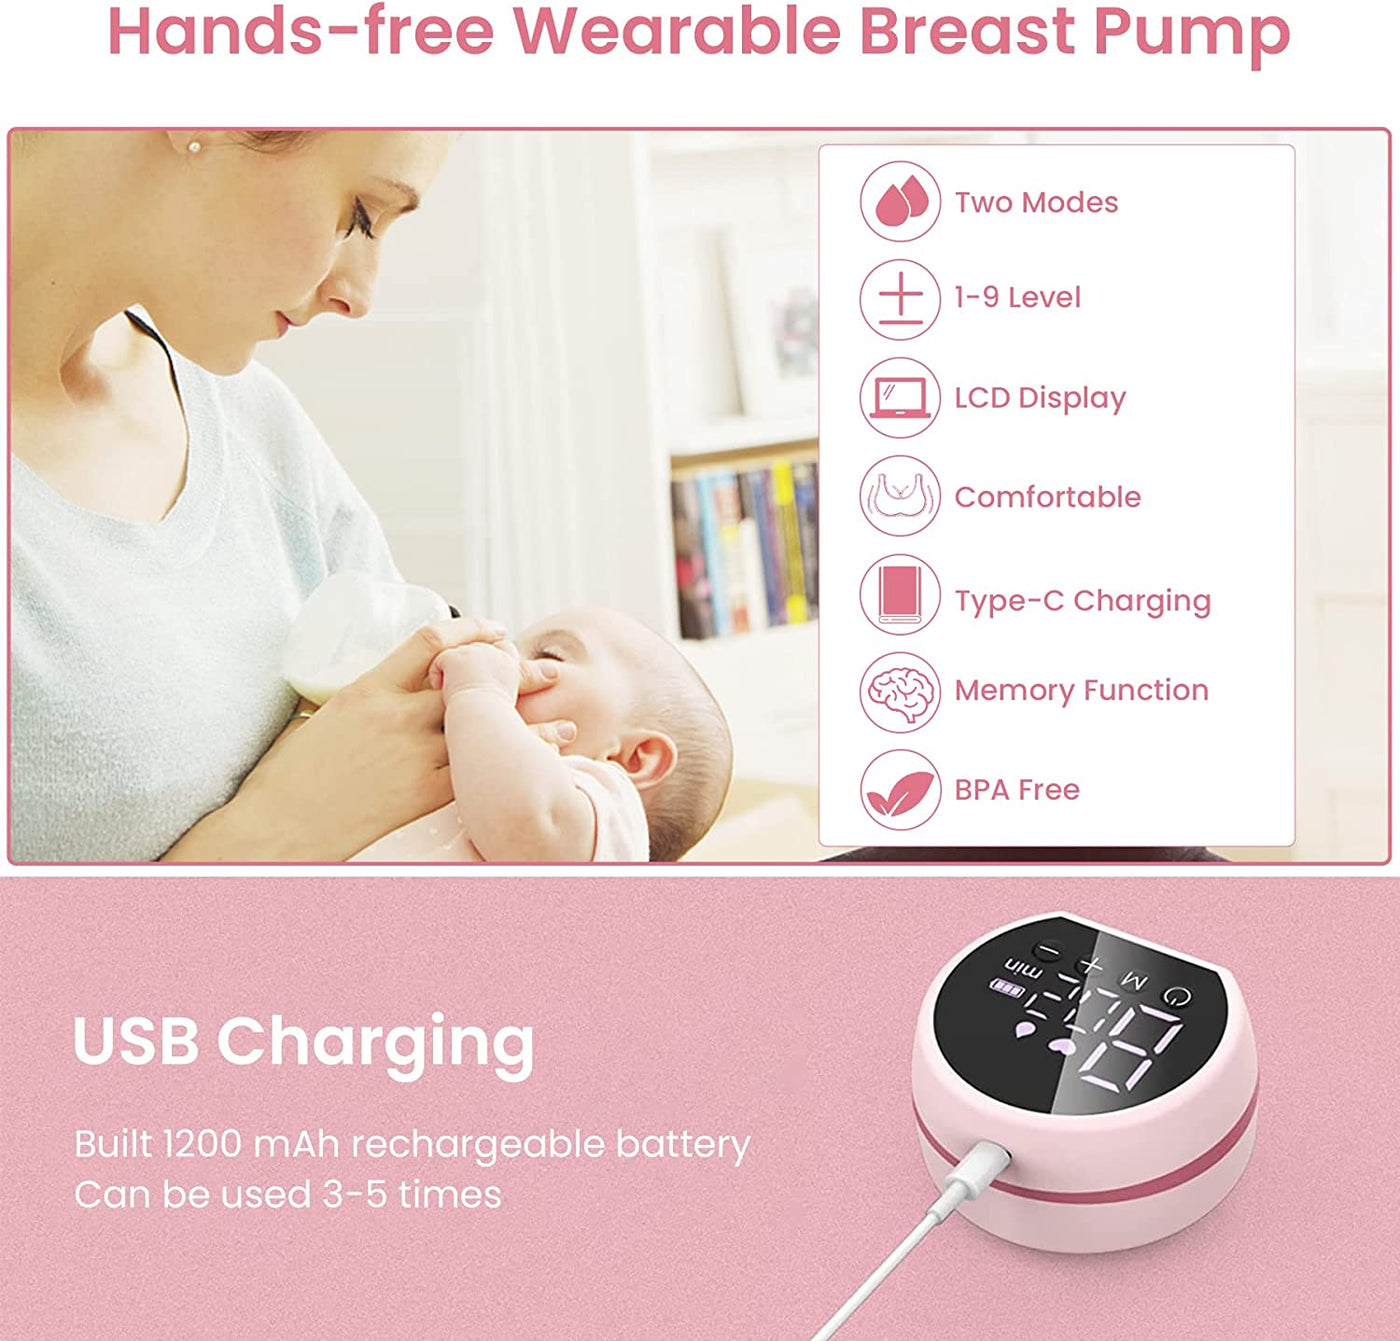 smart wearable breast pump that lets mothers go hands-free